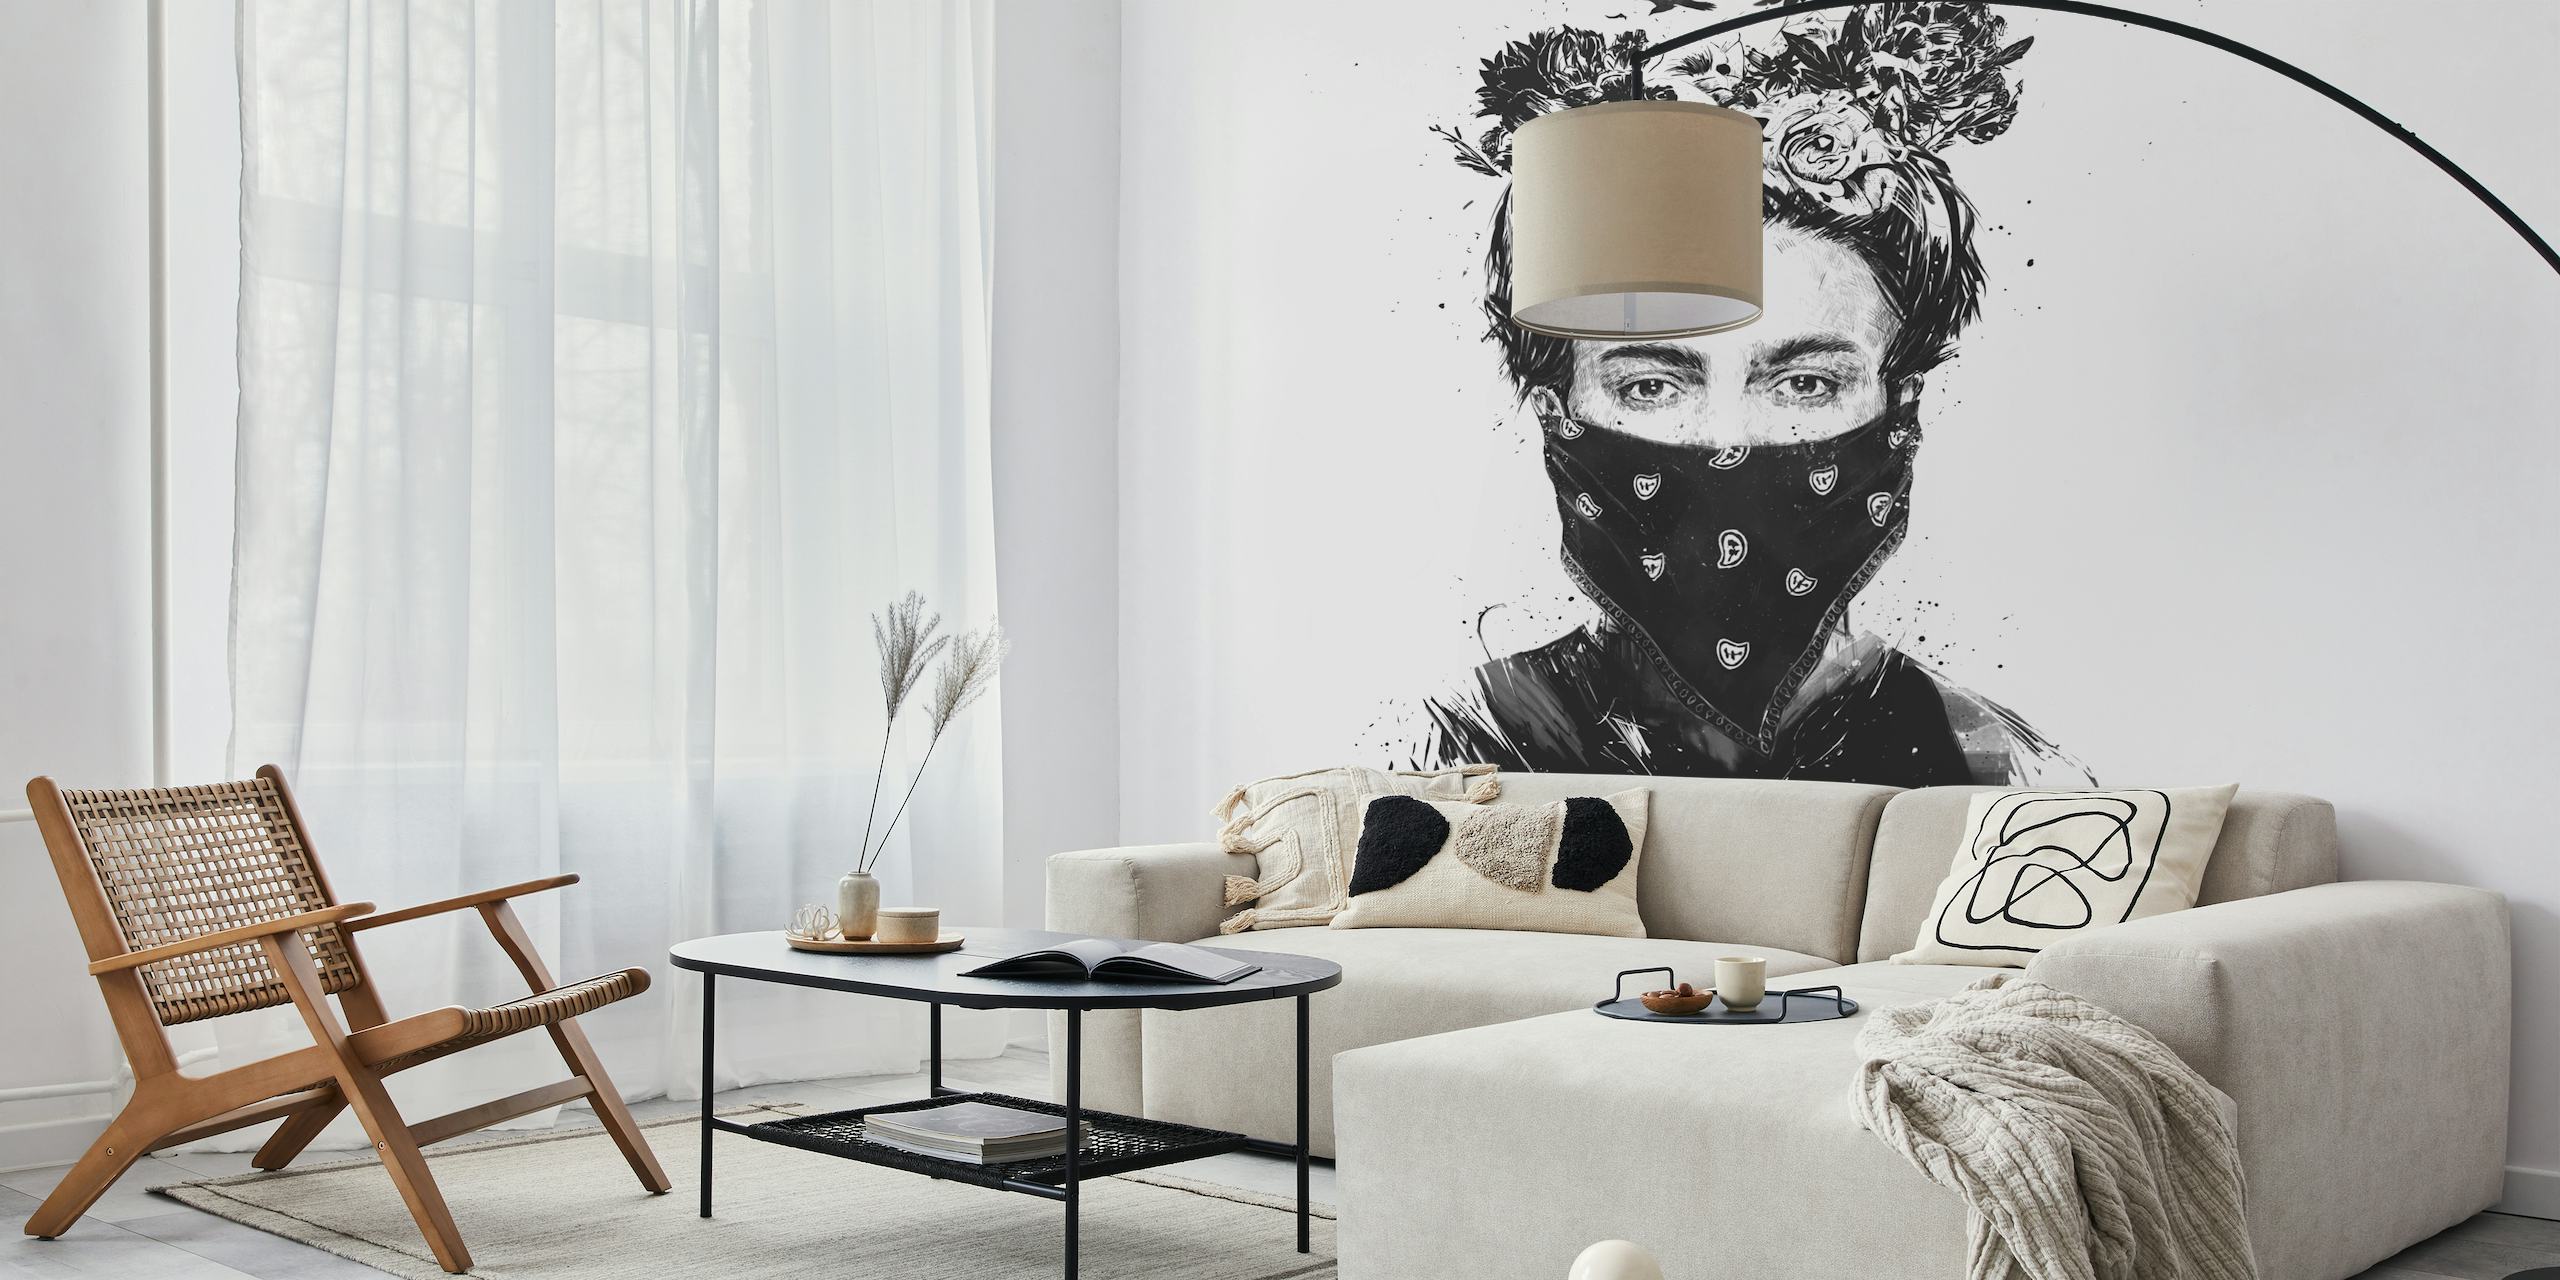 Black and white wall mural of a girl with a flower crown and a patterned scarf over her face